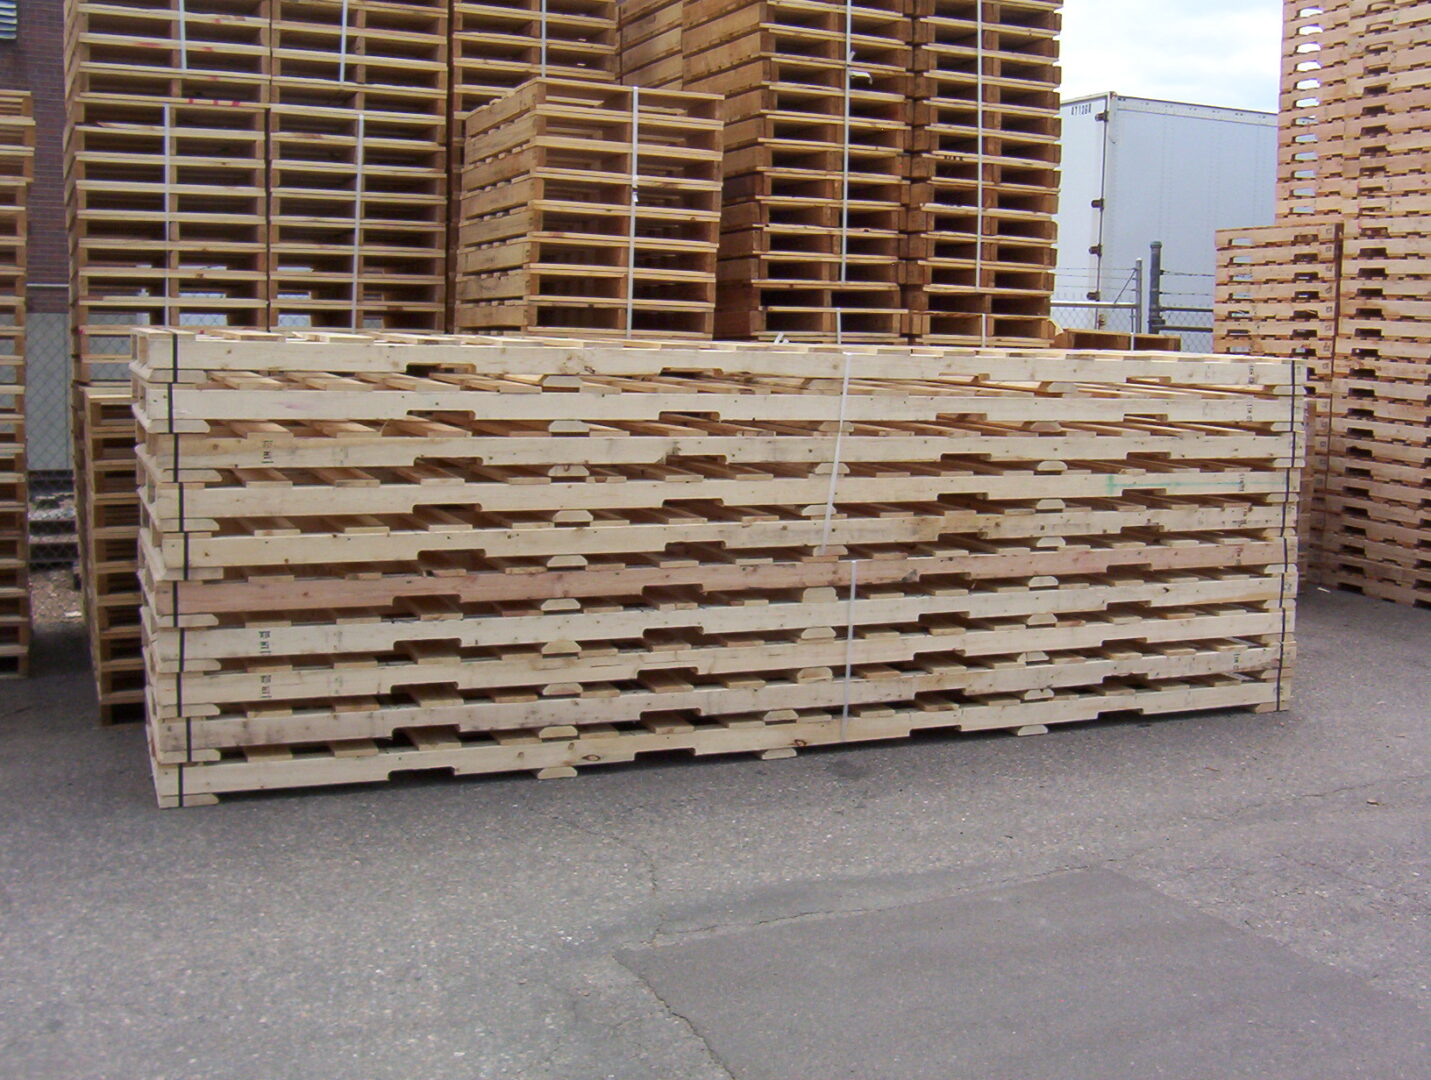 A pile of wooden pallets in front of many other pallets.